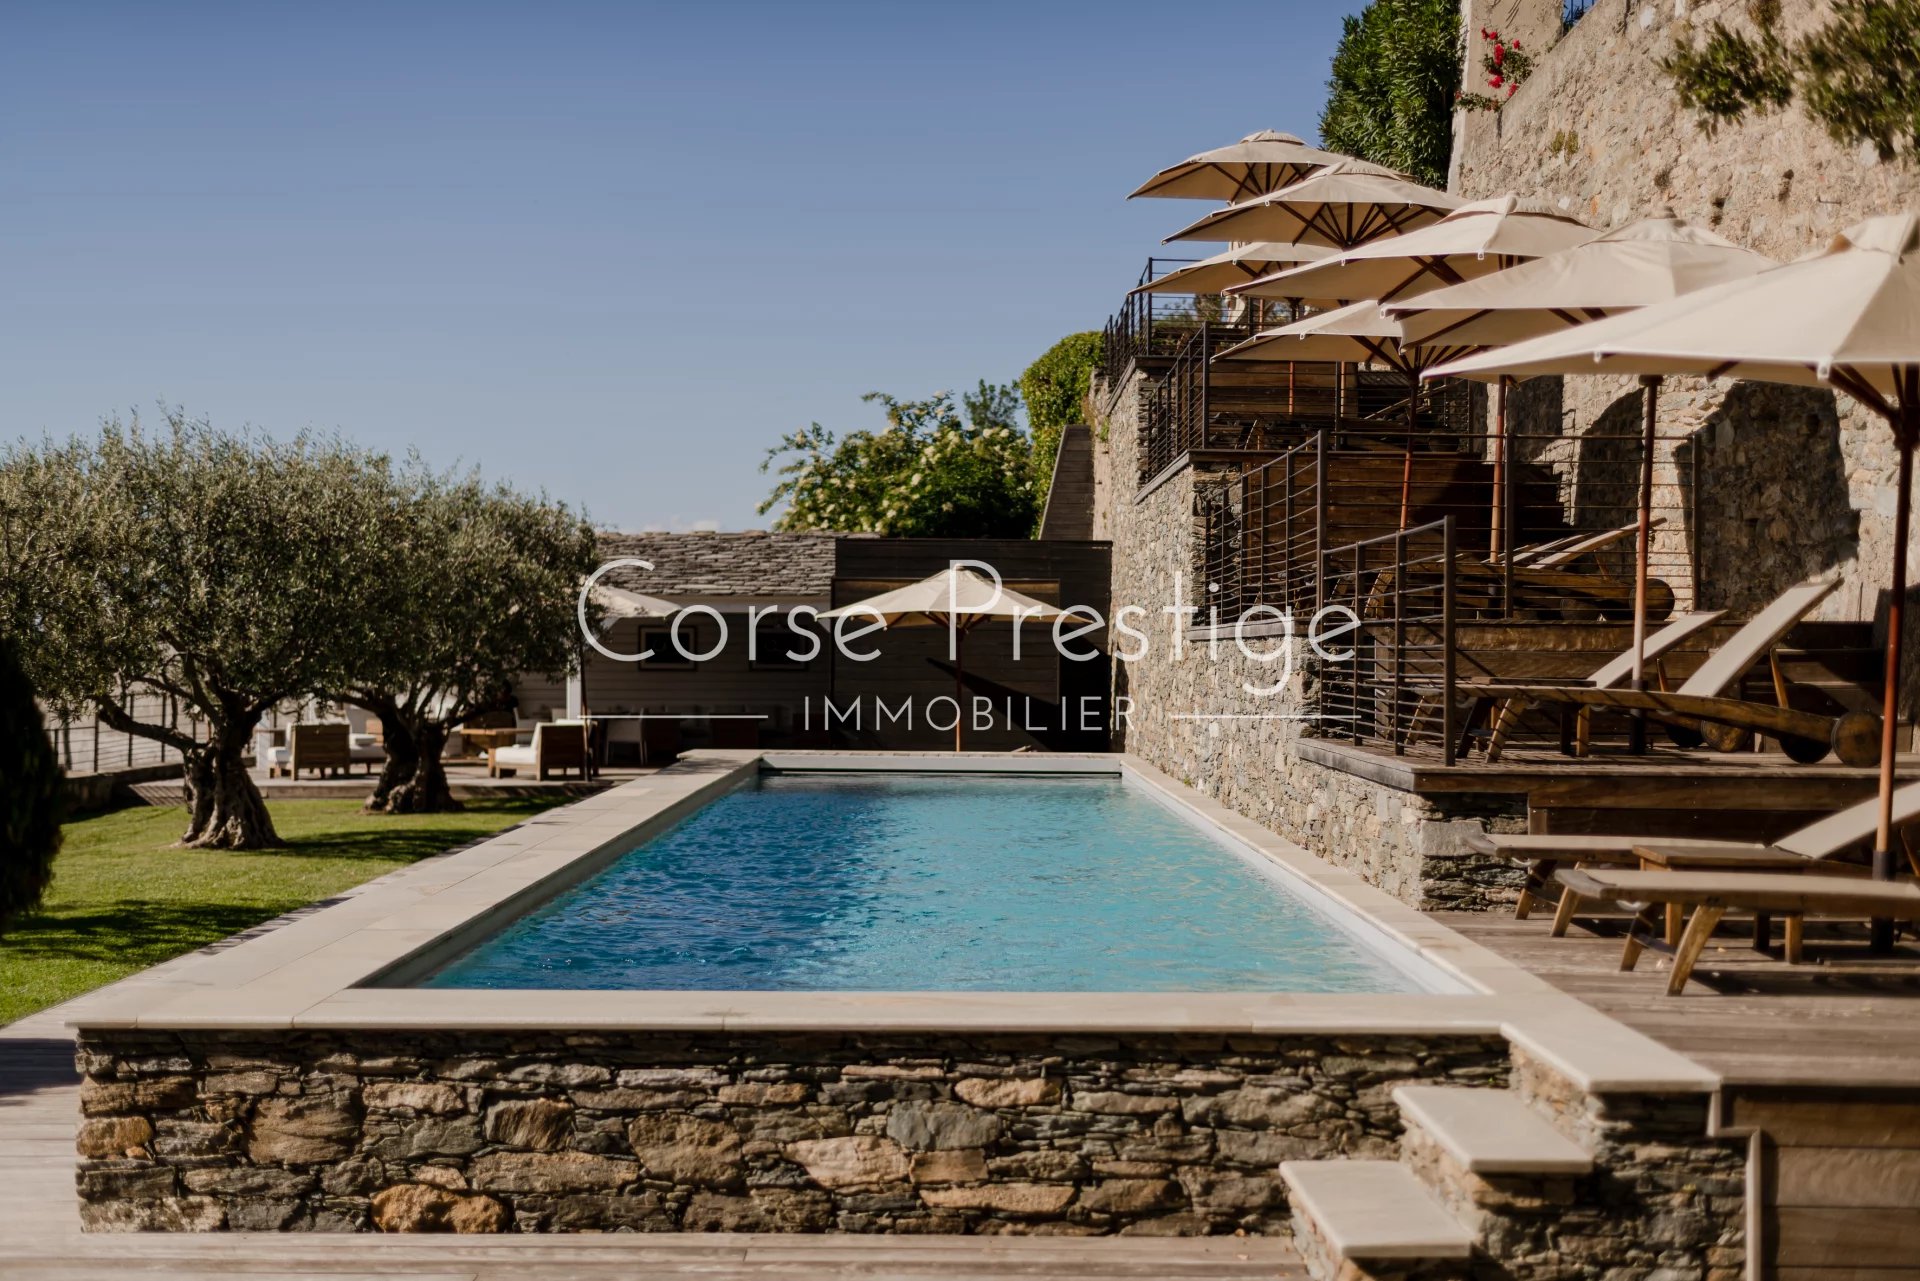 boutik hotel for sale in corsica - authentic mansion image1